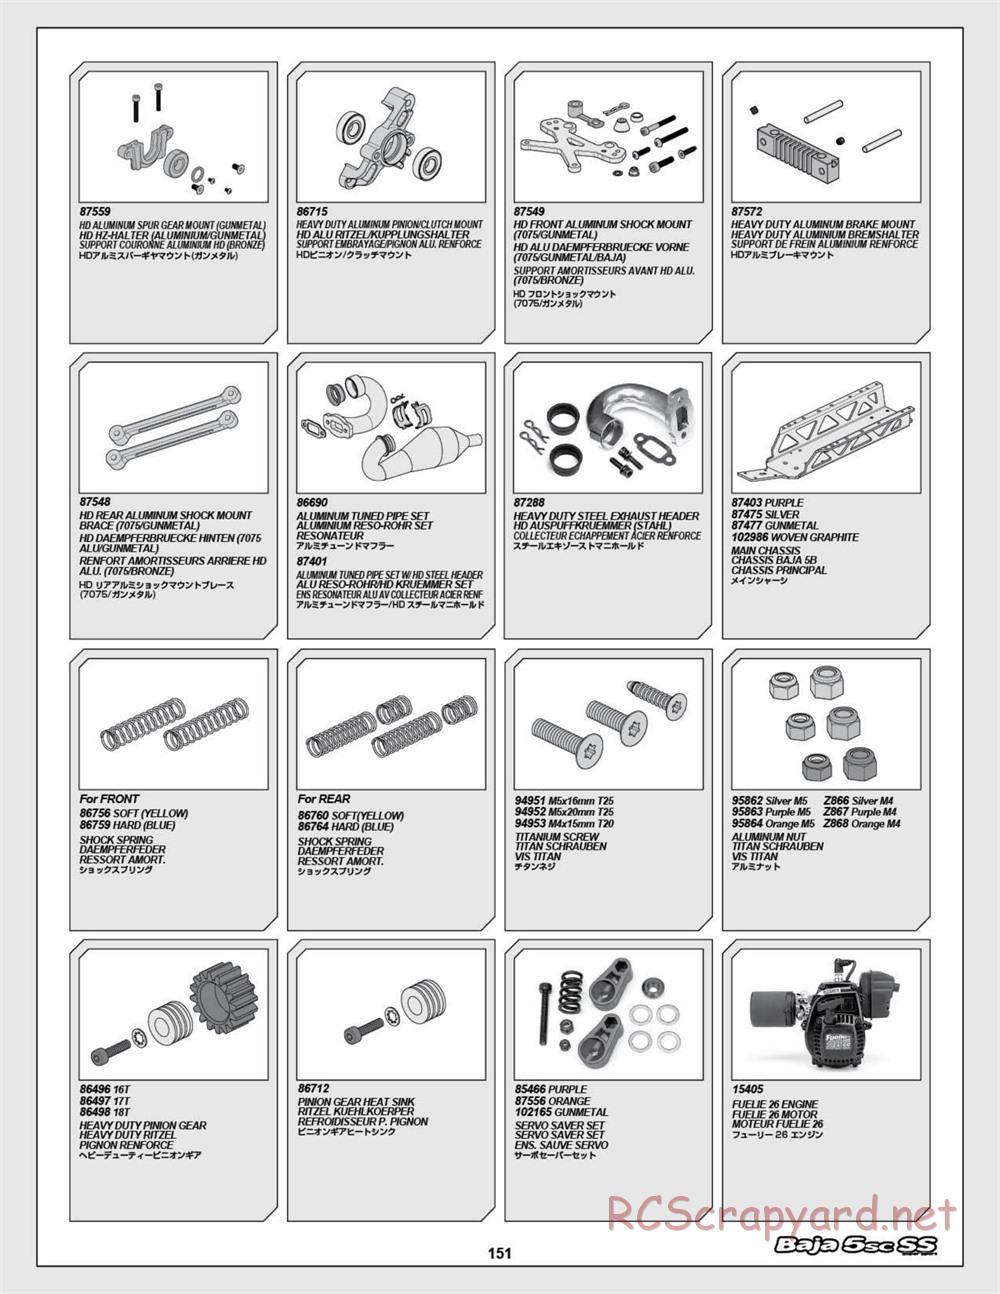 HPI - Baja 5SC SS - Exploded View - Page 151